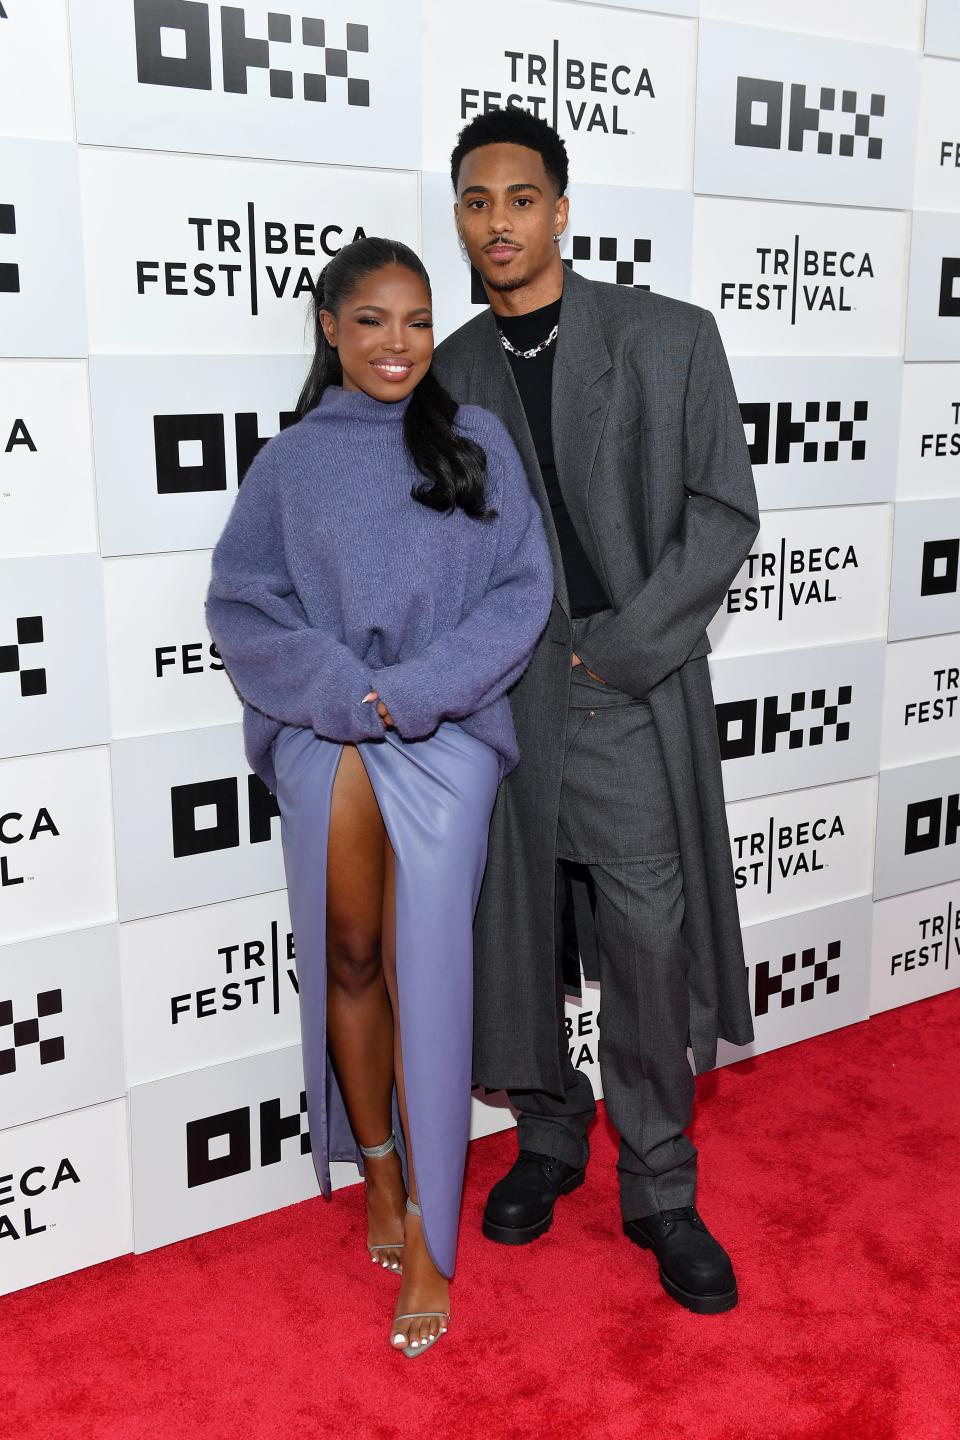 Keith Powers faced headlines that he and Ryan Destiny had broken up in 2022. The two posed together at the Tribeca premiere of "The Perfect Find."